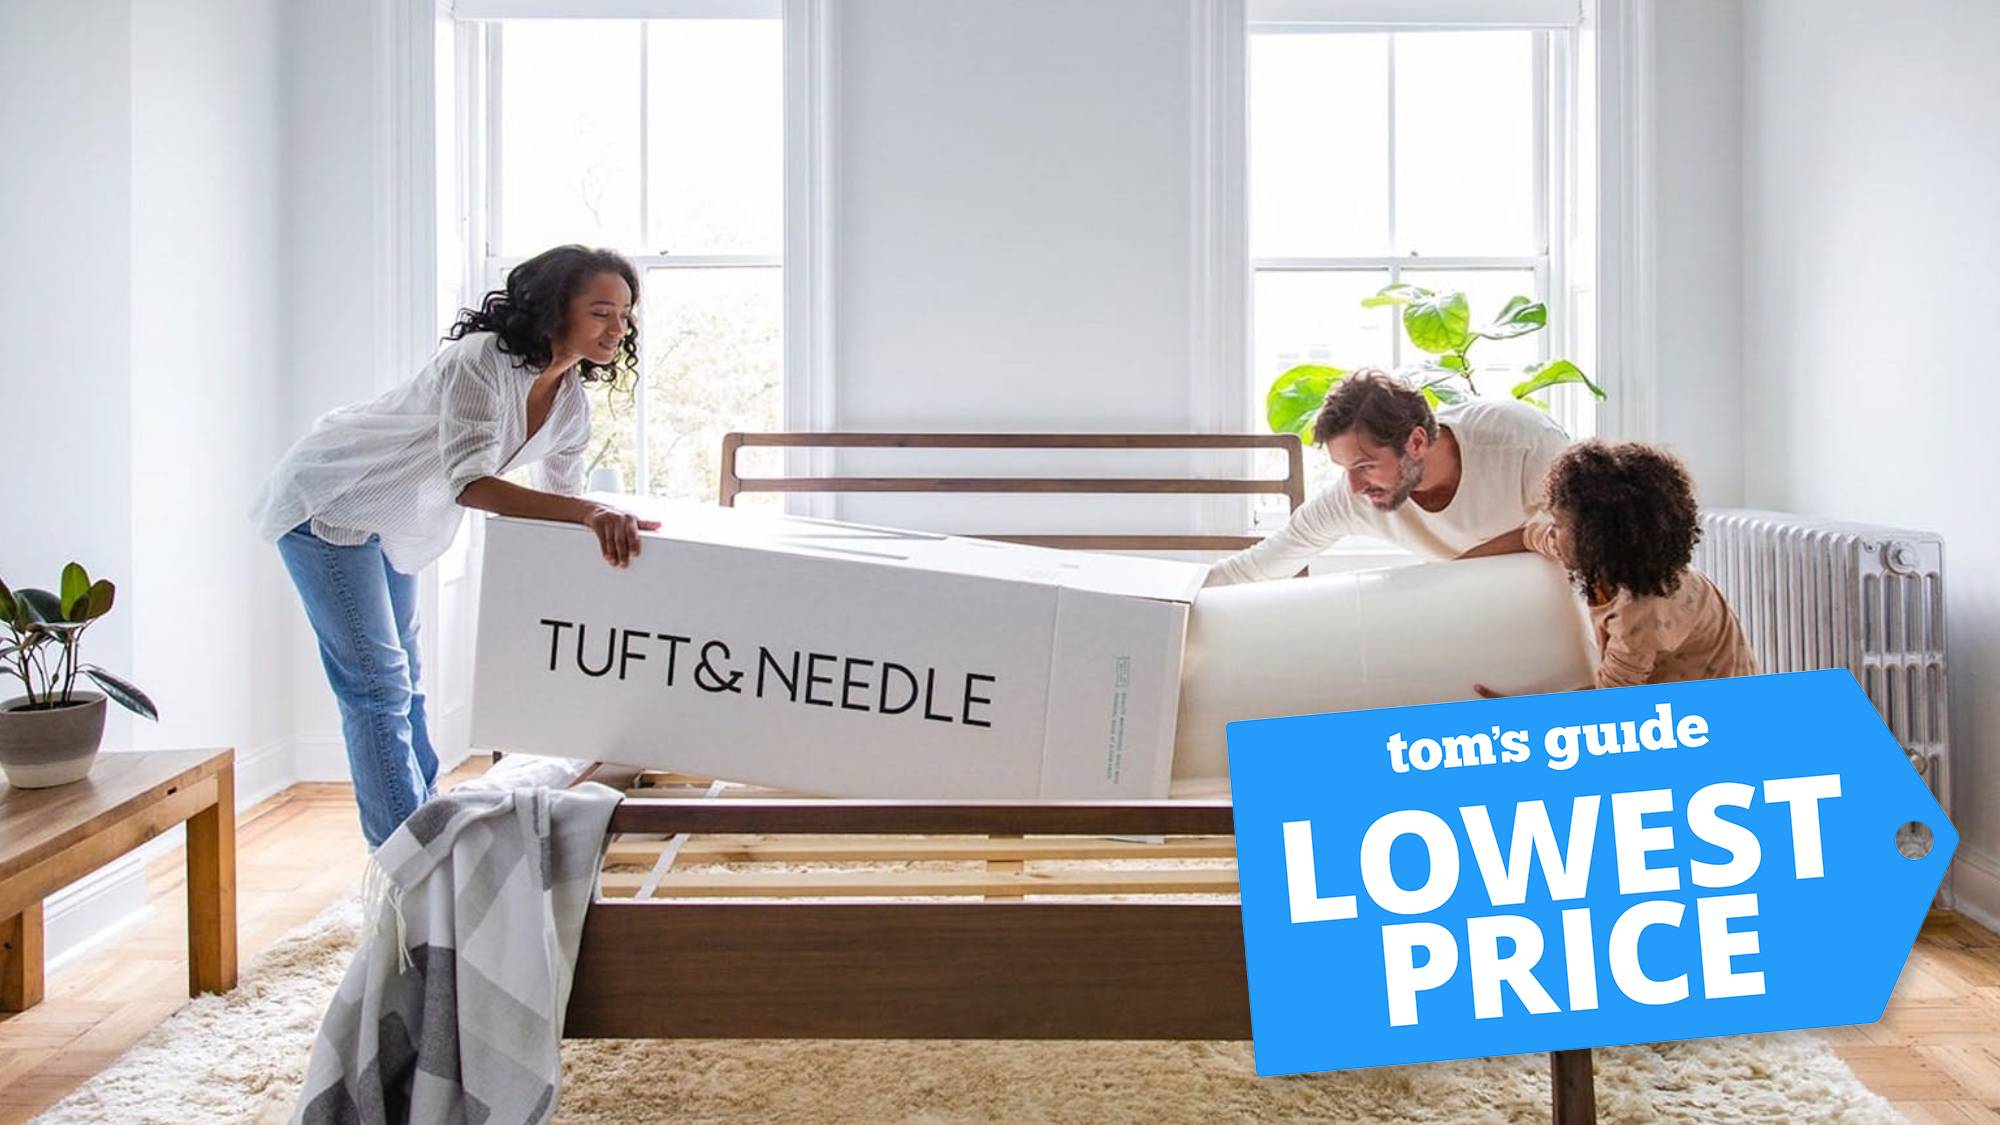 Tuft & Needle Labor Day Sale takes up to $600 off its award-winning mattresses